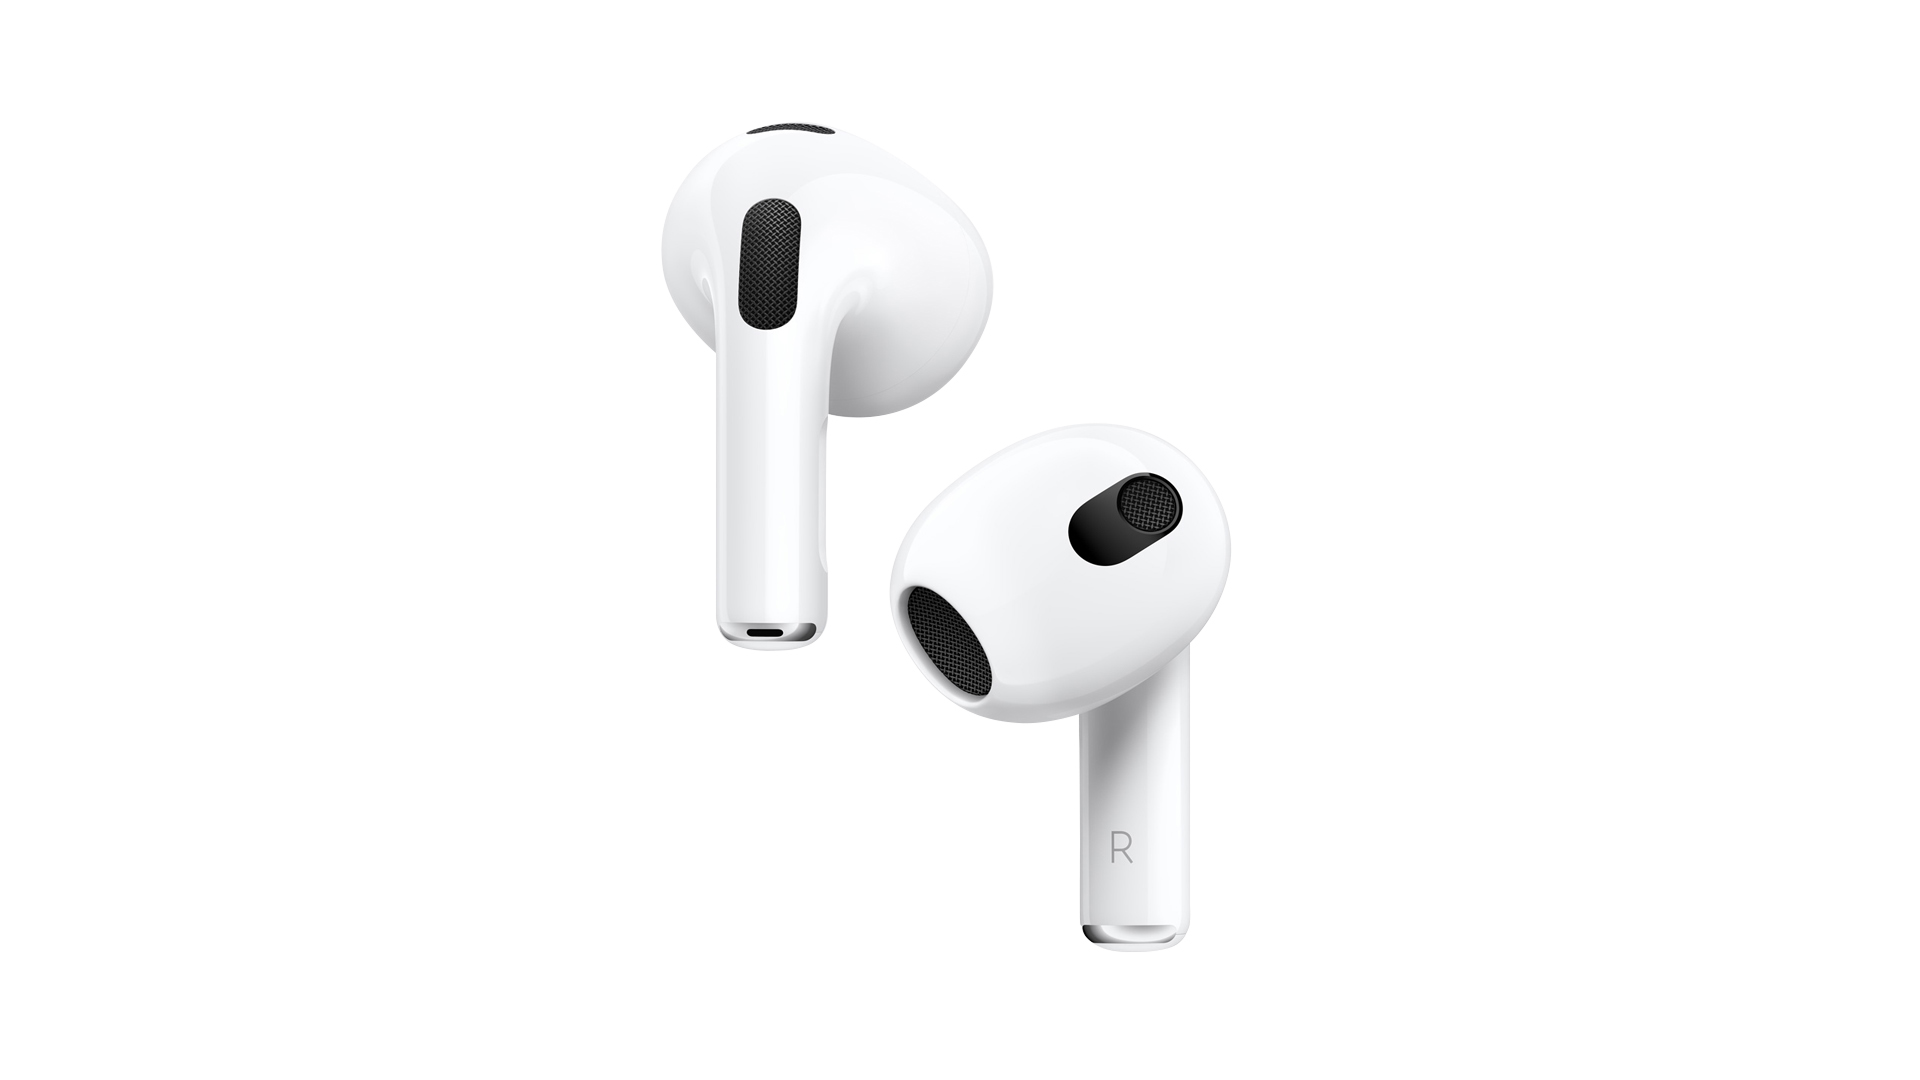 Forfatning Gå forud bunke AirPods 3 review: AirPods advance closer to Pro sibling | What Hi-Fi?